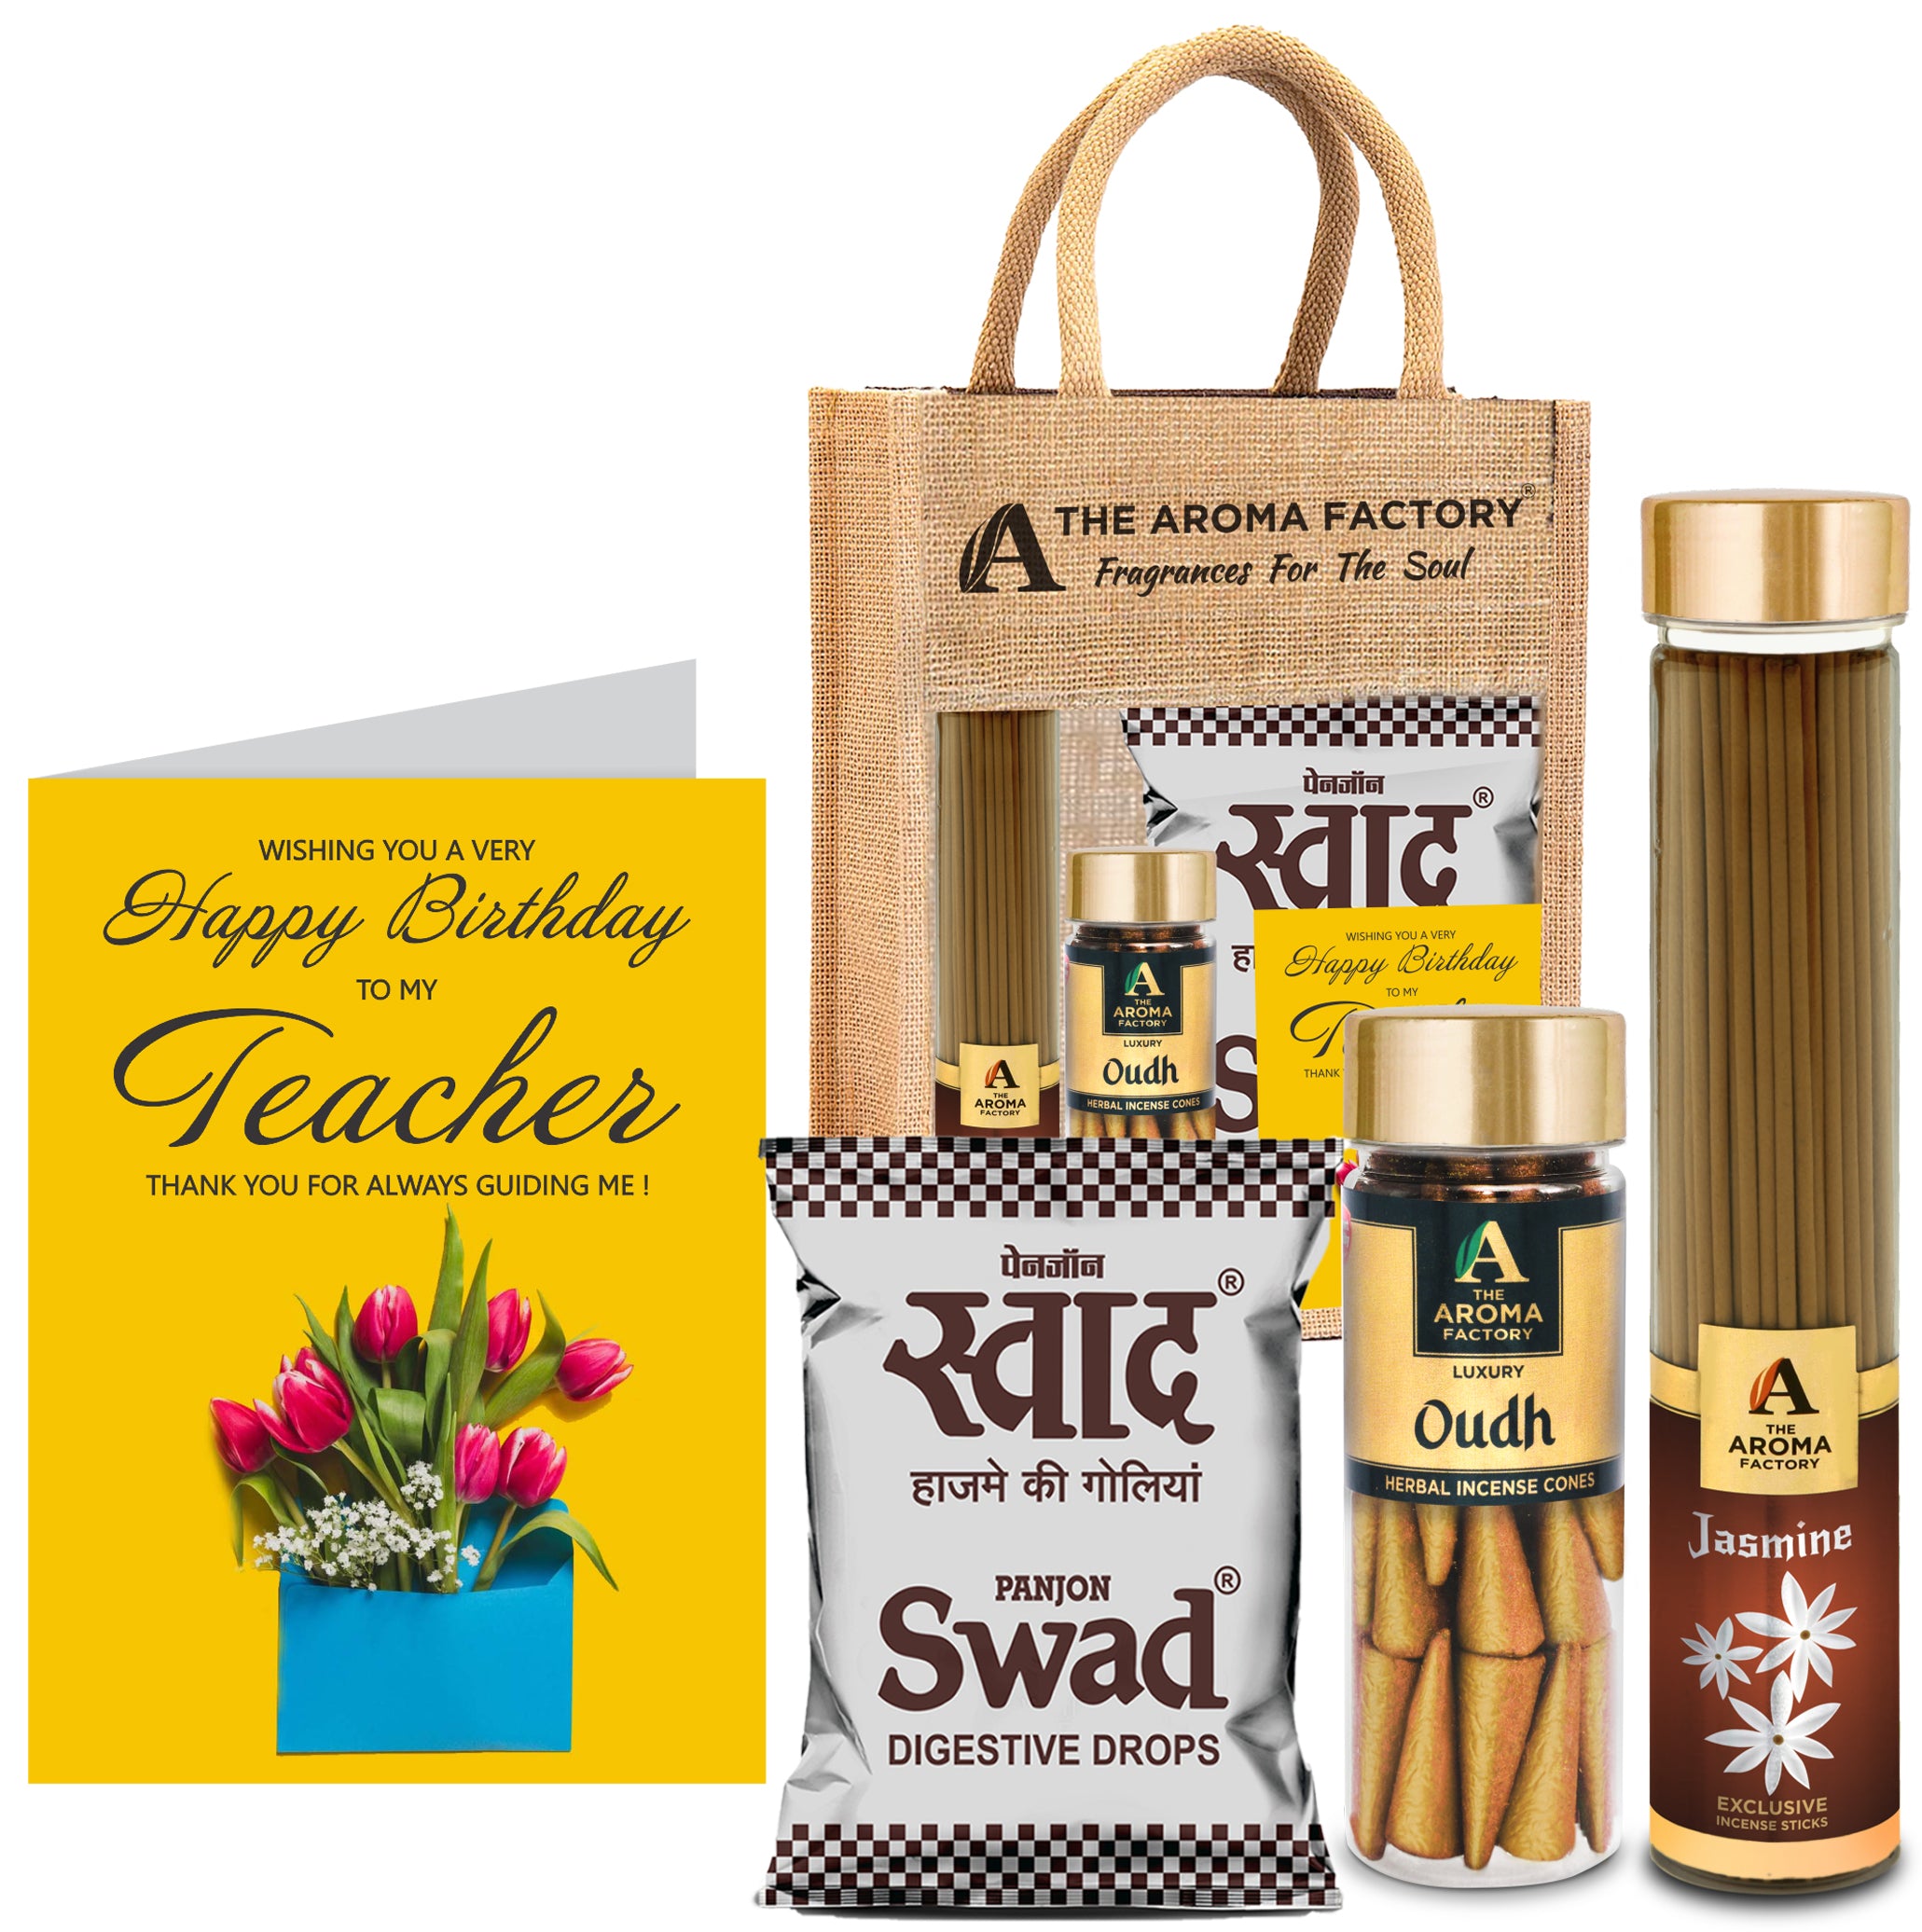 The Aroma Factory Happy Birthday Teacher Gift with Card (25 Swad Candy, Jasmine Agarbatti Bottle, Oudh Cone) in Jute Bag